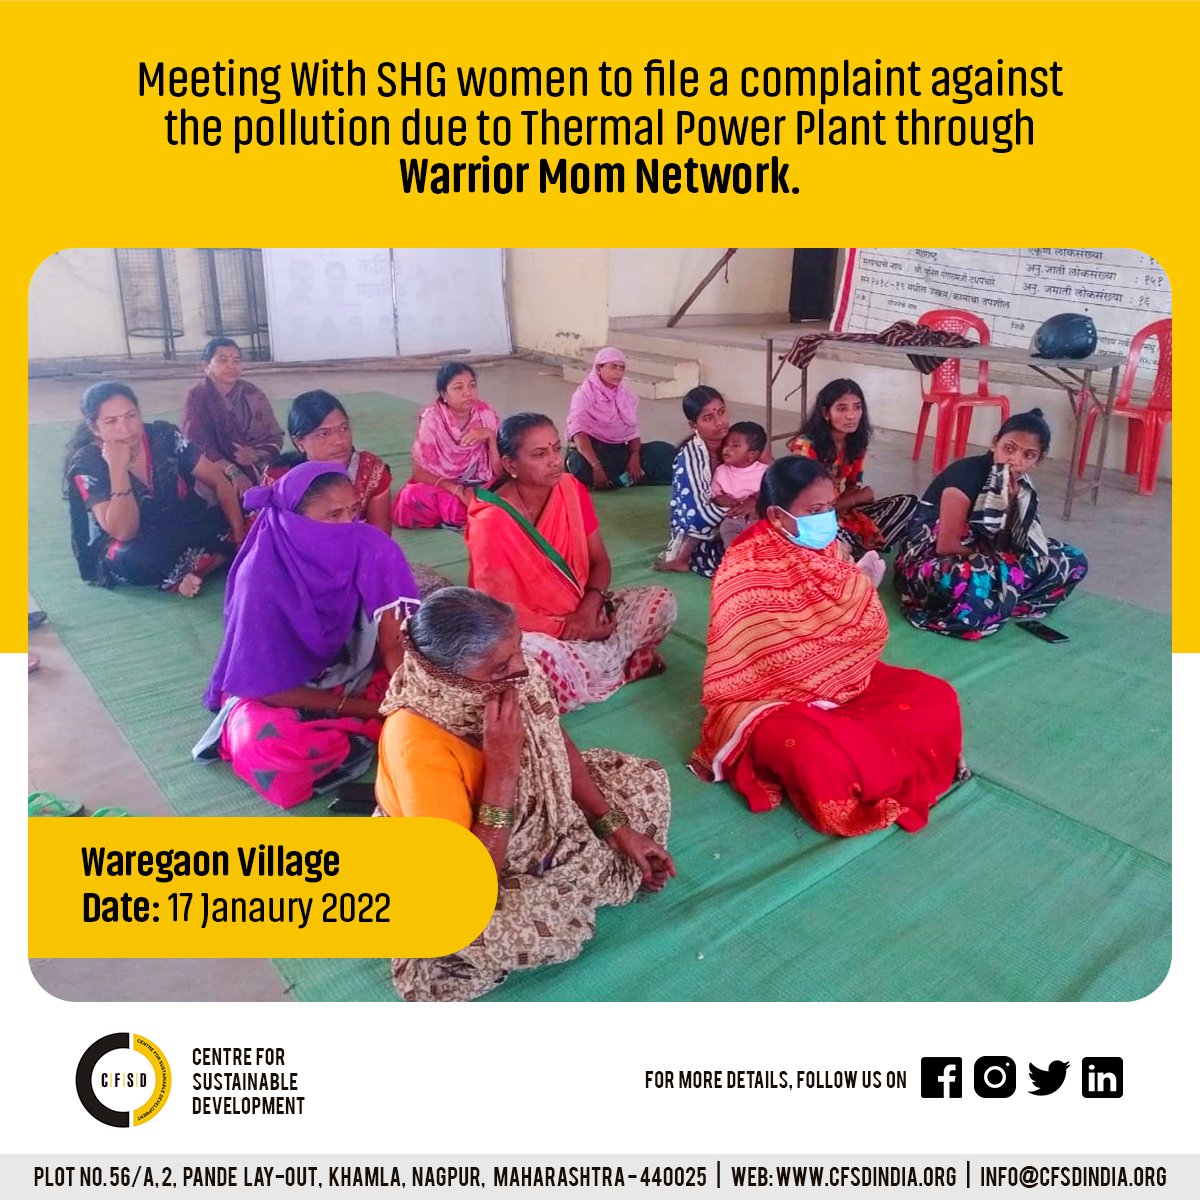 Meeting With SHG women in different villages to file a complaint against the #pollution due to #ThermalPowerPlant through Warrior Mom Network.
#CFSD #clenindia #workshop #women #villages #liveclean 
@Warriormomsin